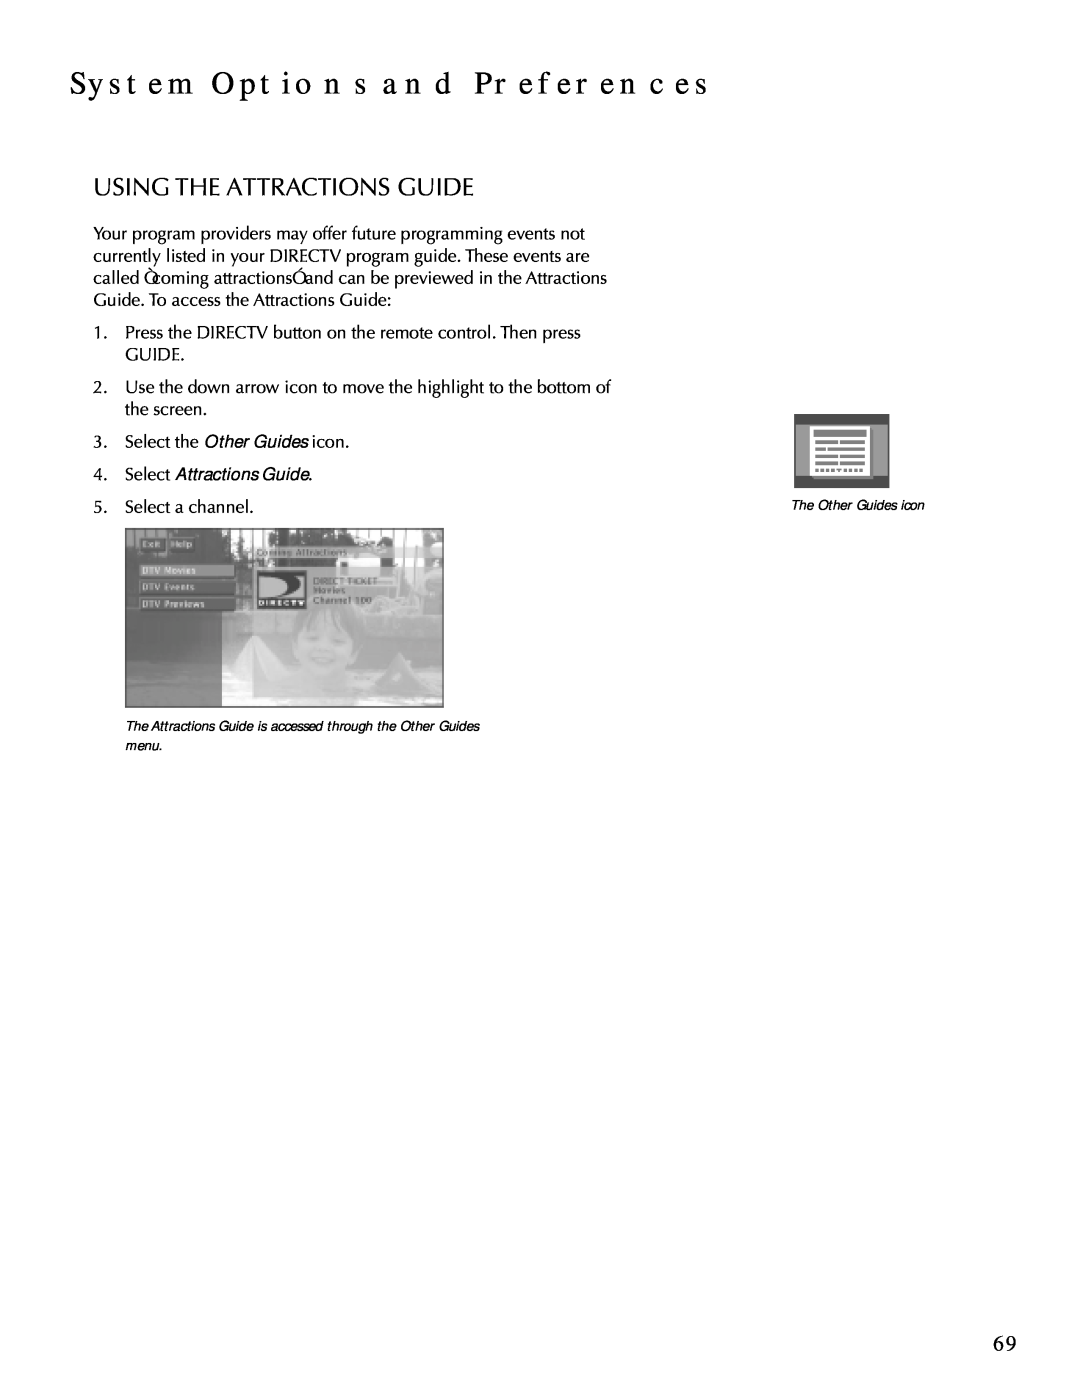 DirecTV HDTV user manual Using The Attractions Guide, System Options And Preferences 